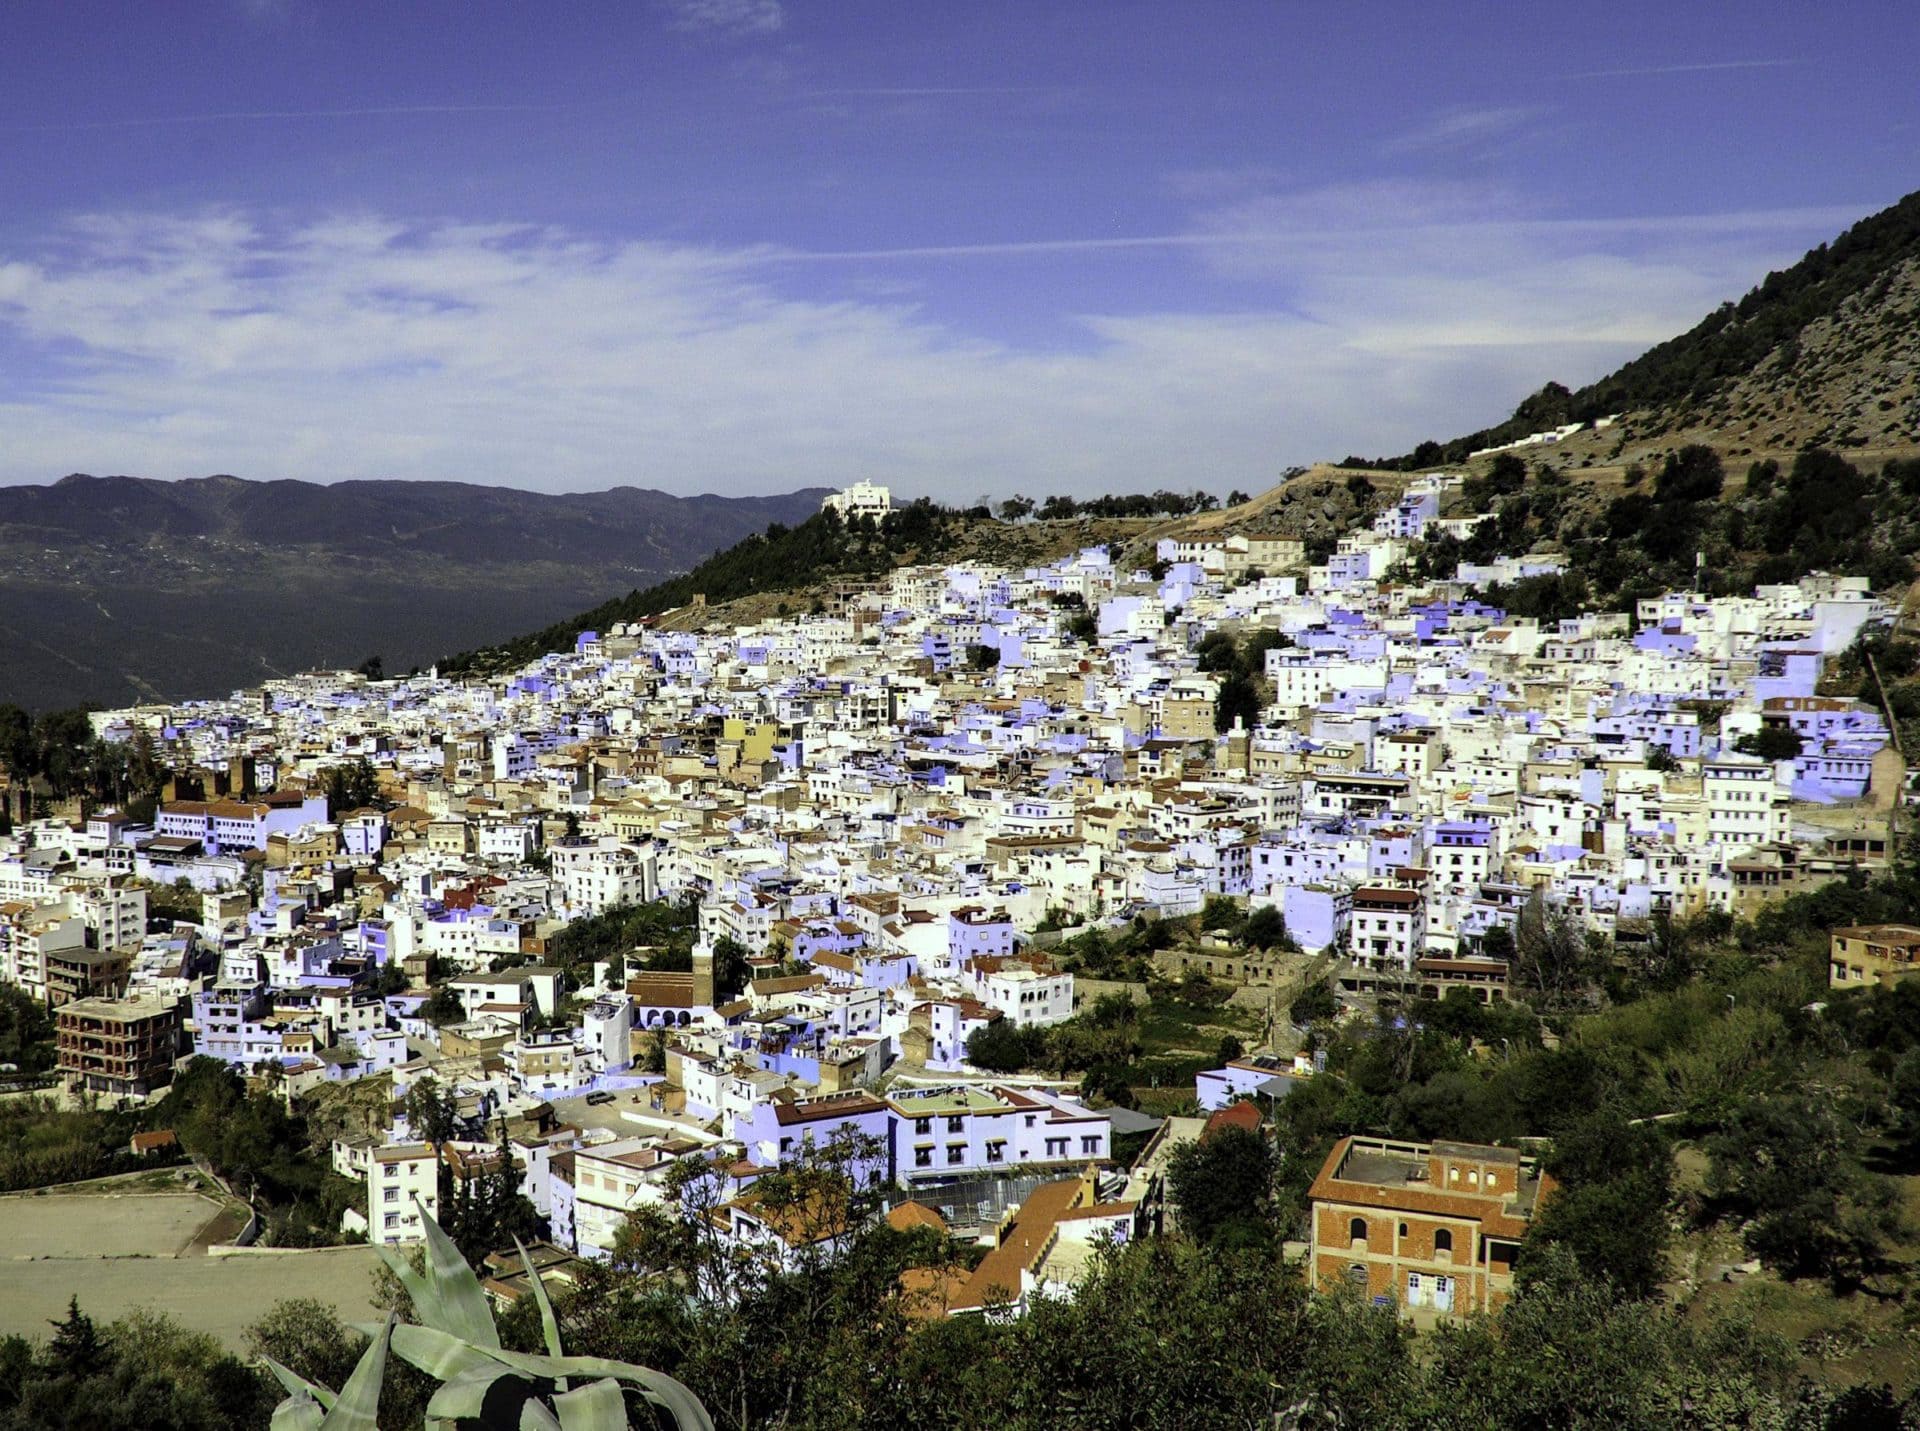 Chefchaouen Morocco is called the “Blue City” because people have eyes.